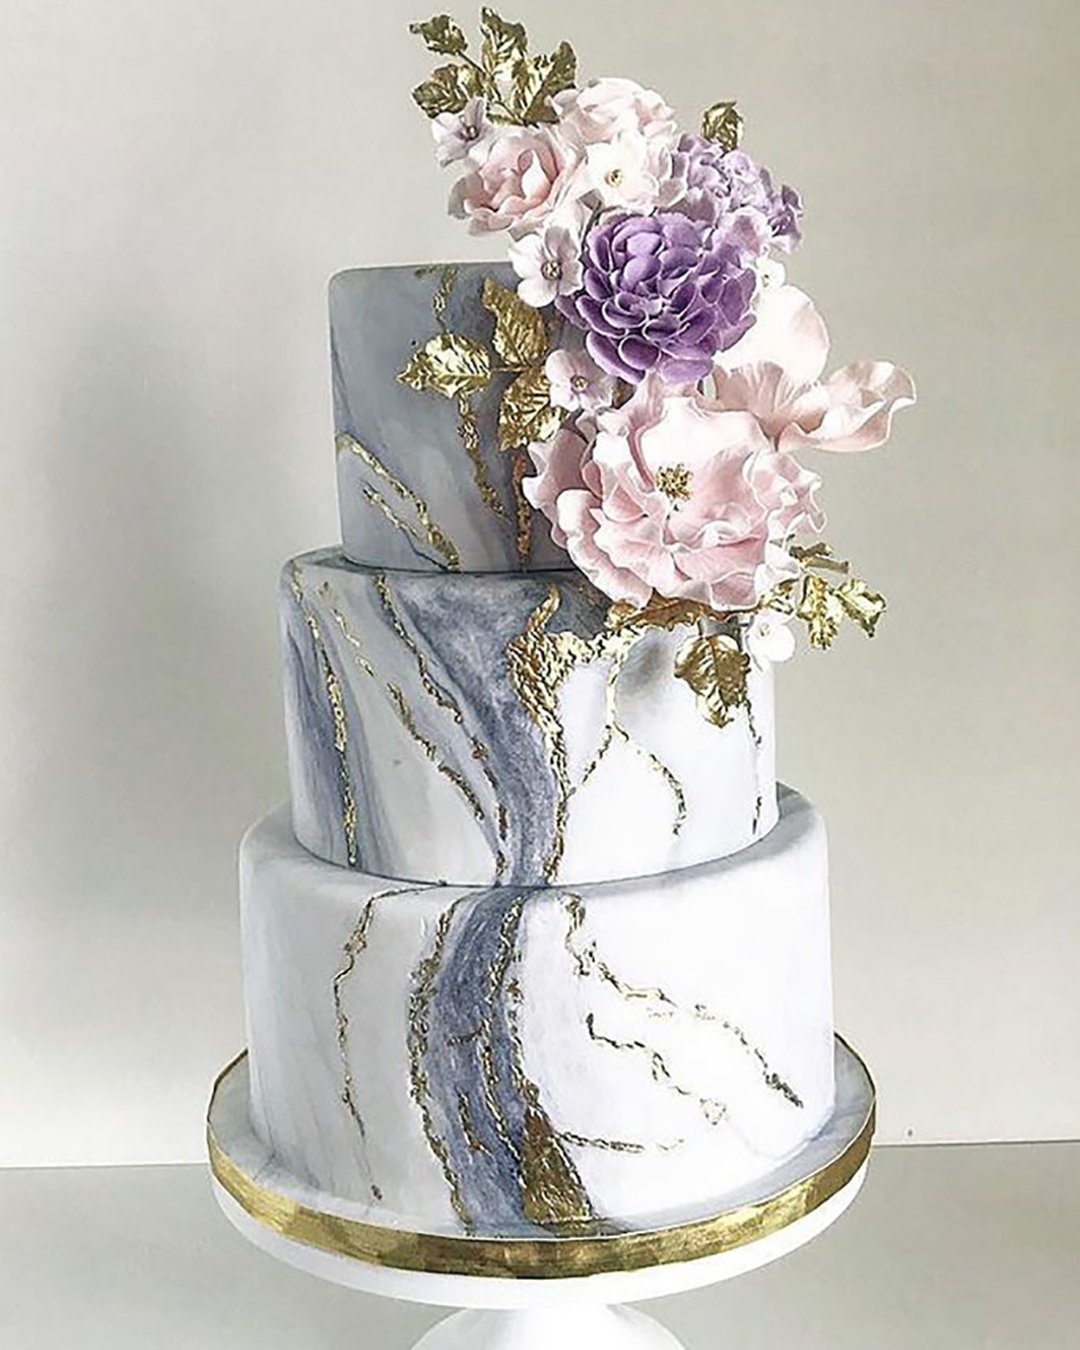 marble wedding cakes three tiered with golden elements and pink lilac flowers custom cakes toronto via instagram